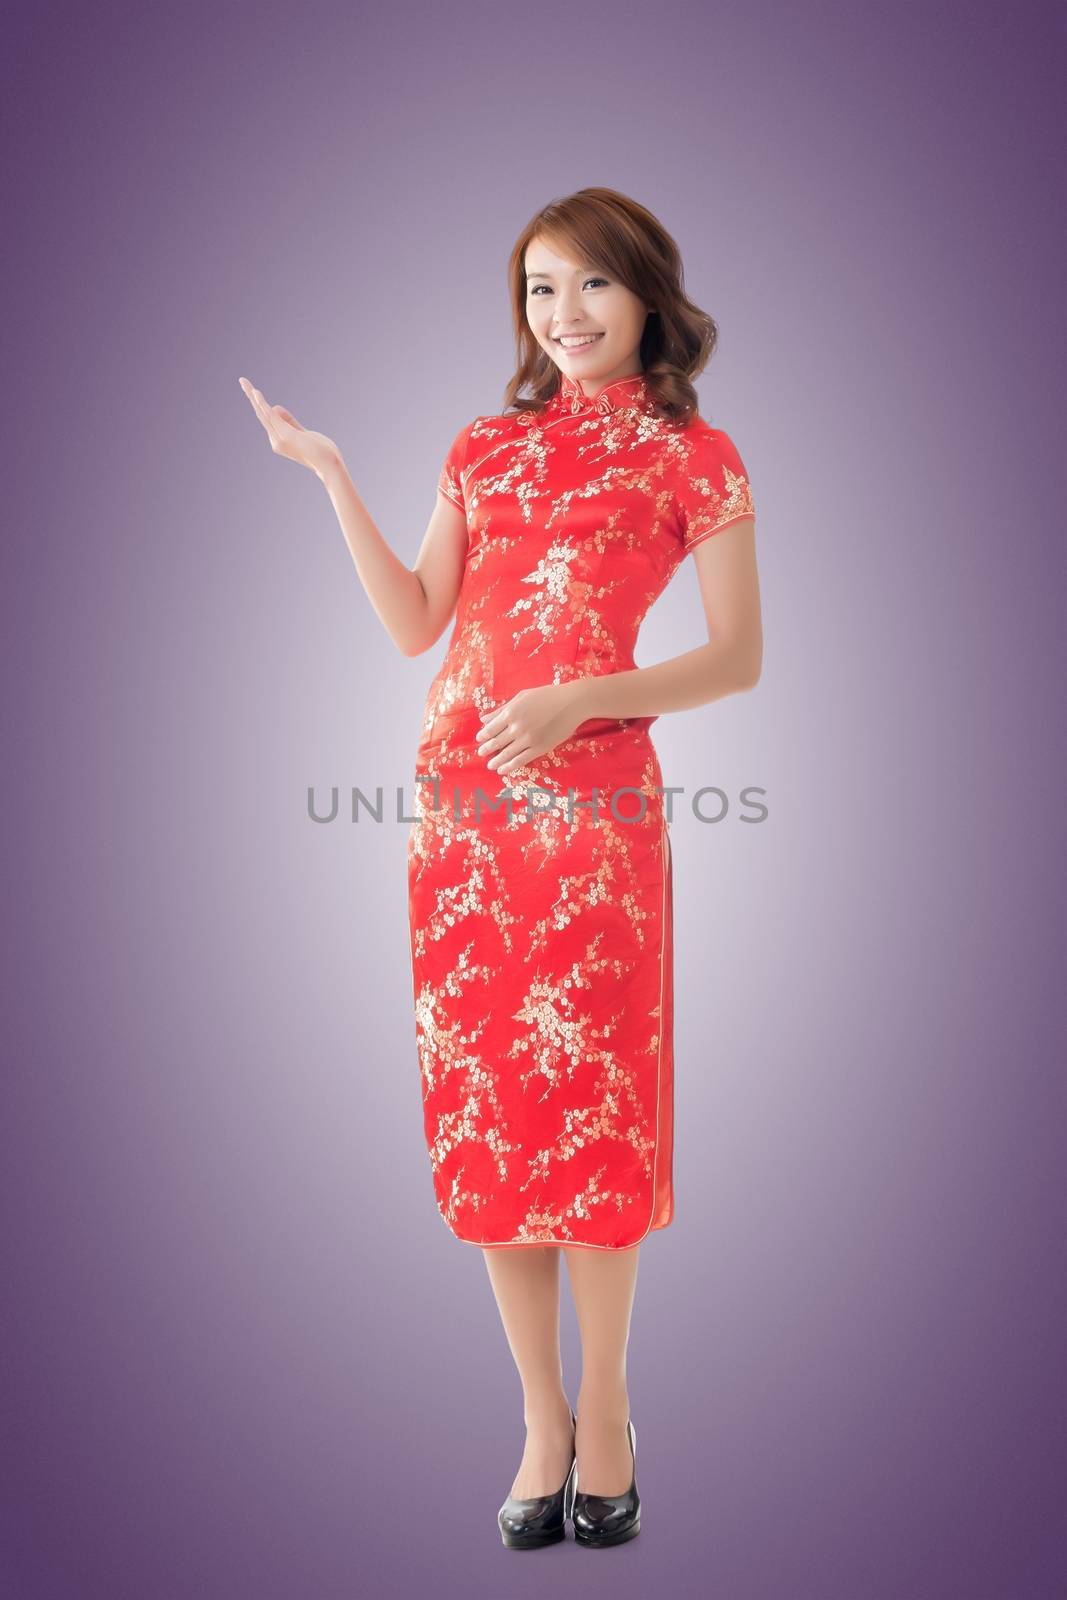 Chinese woman dress traditional cheongsam at New Year and introducing, full length portrait isolated.